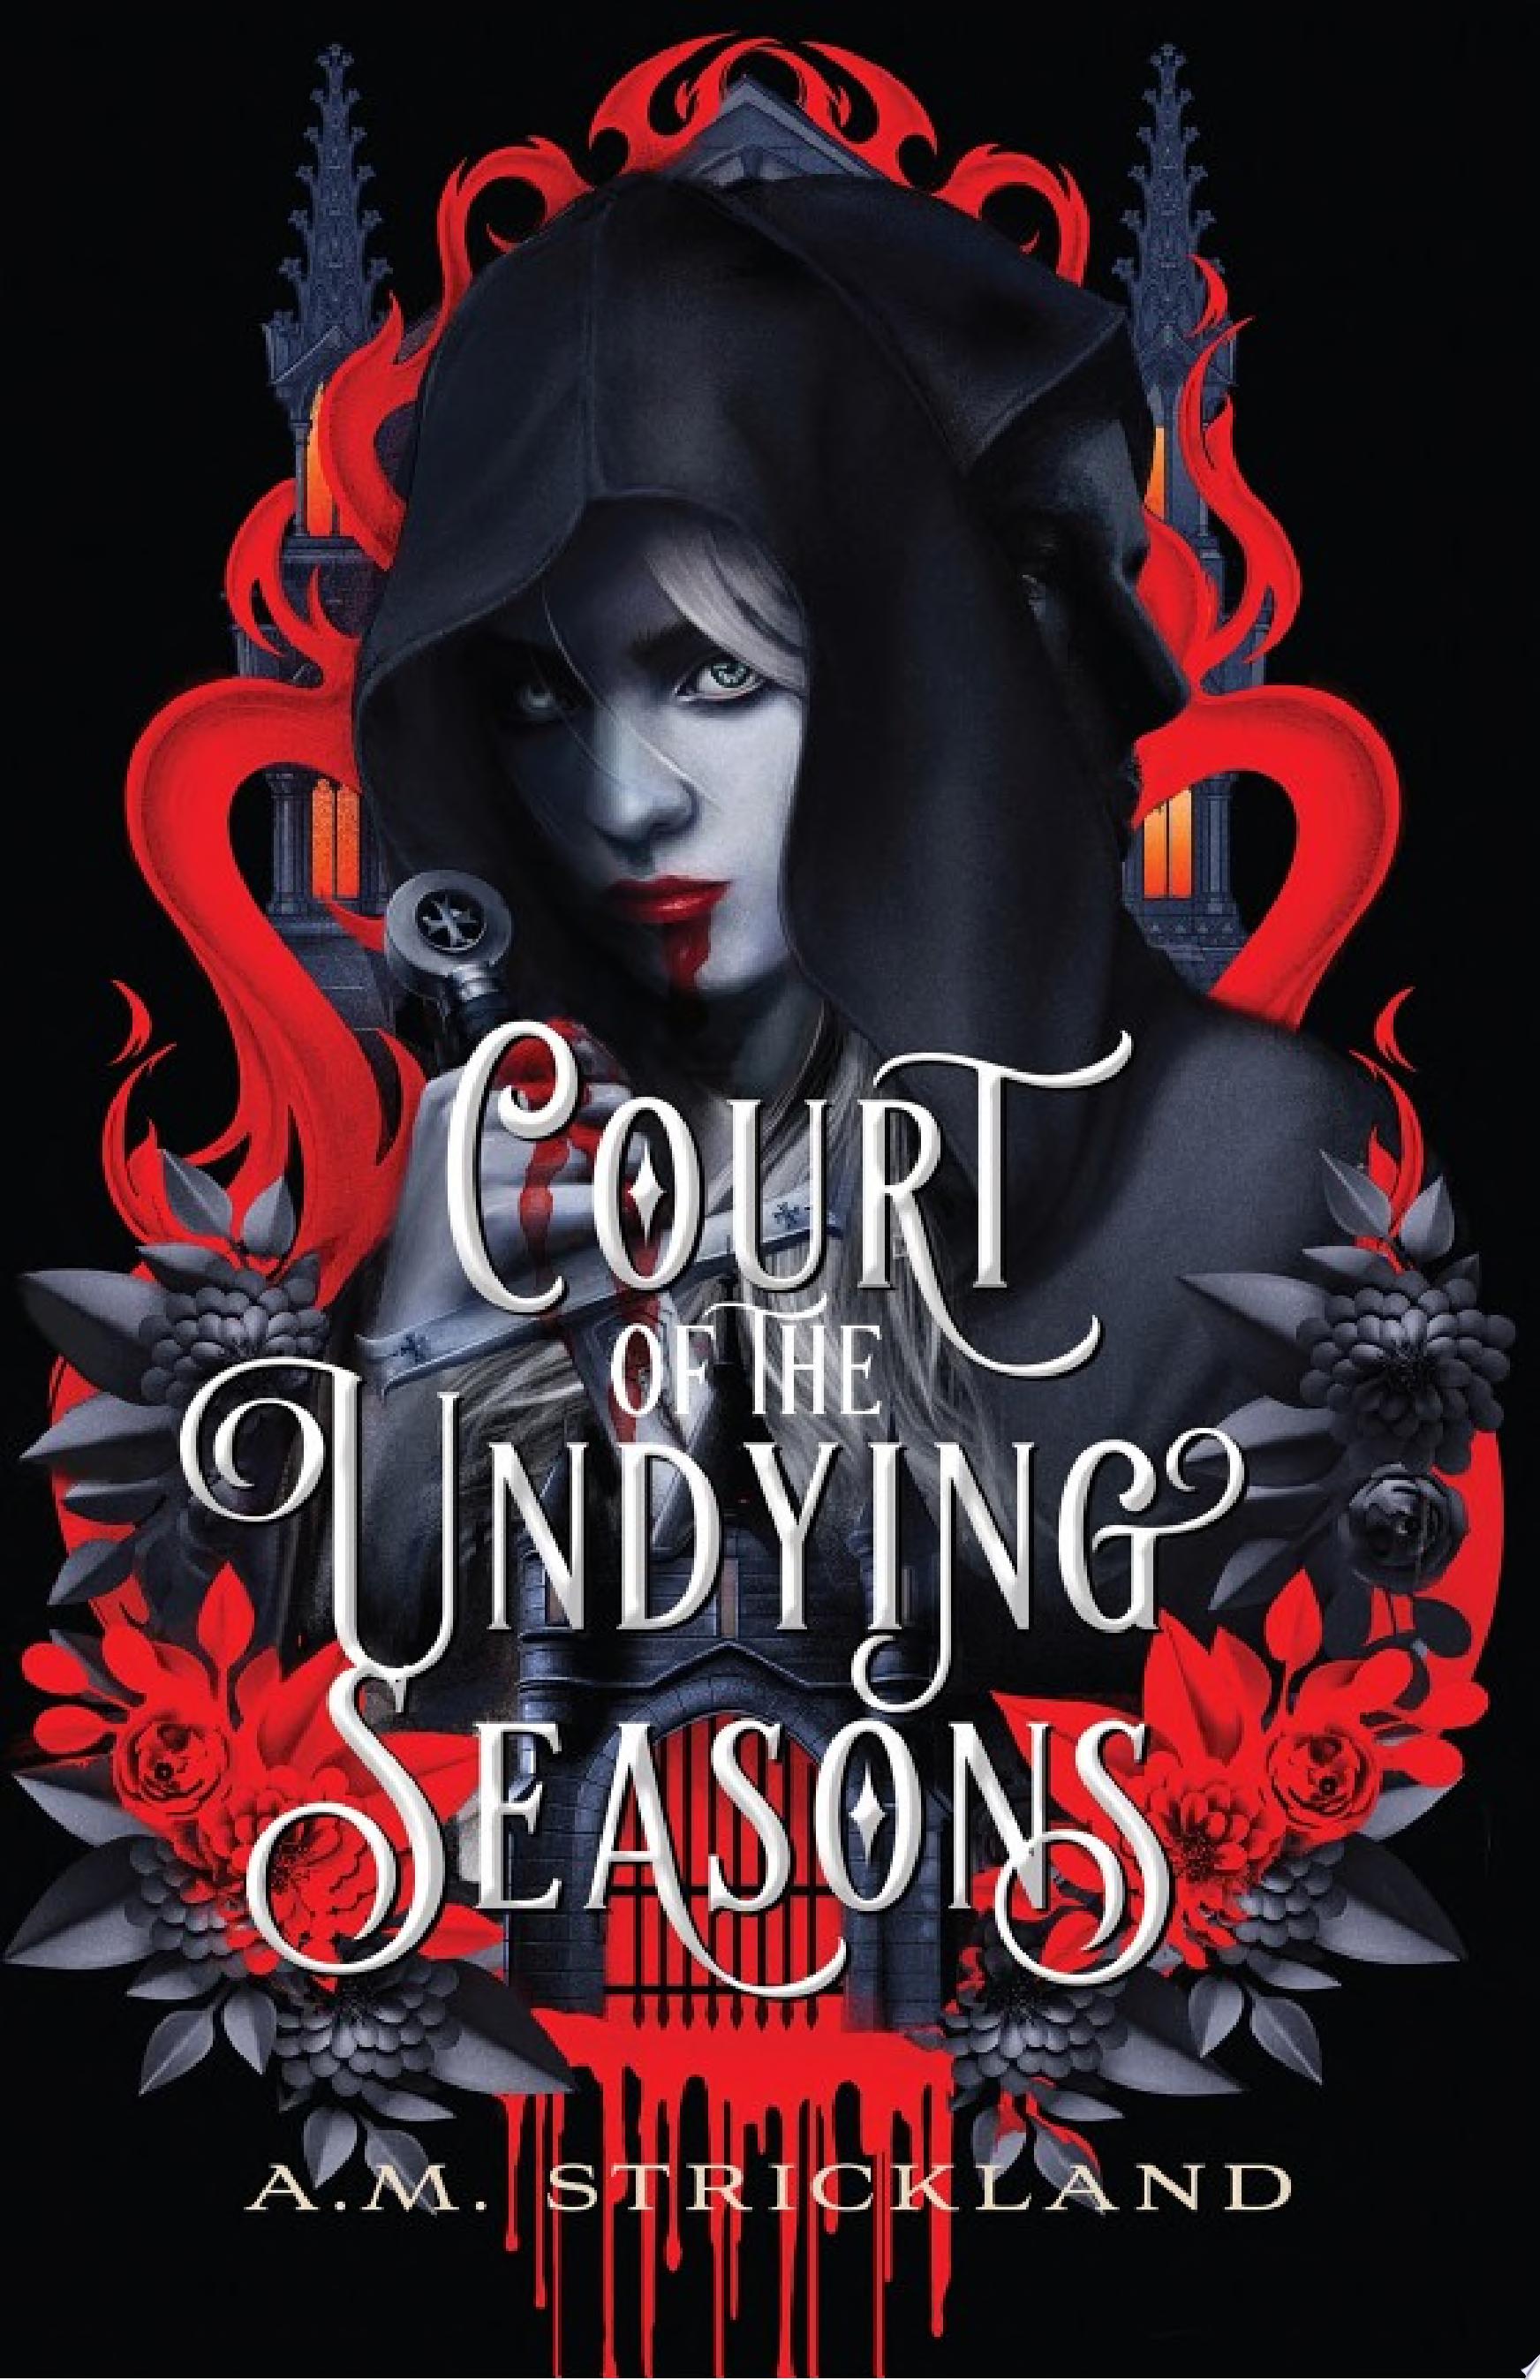 Image for "Court of the Undying Seasons"